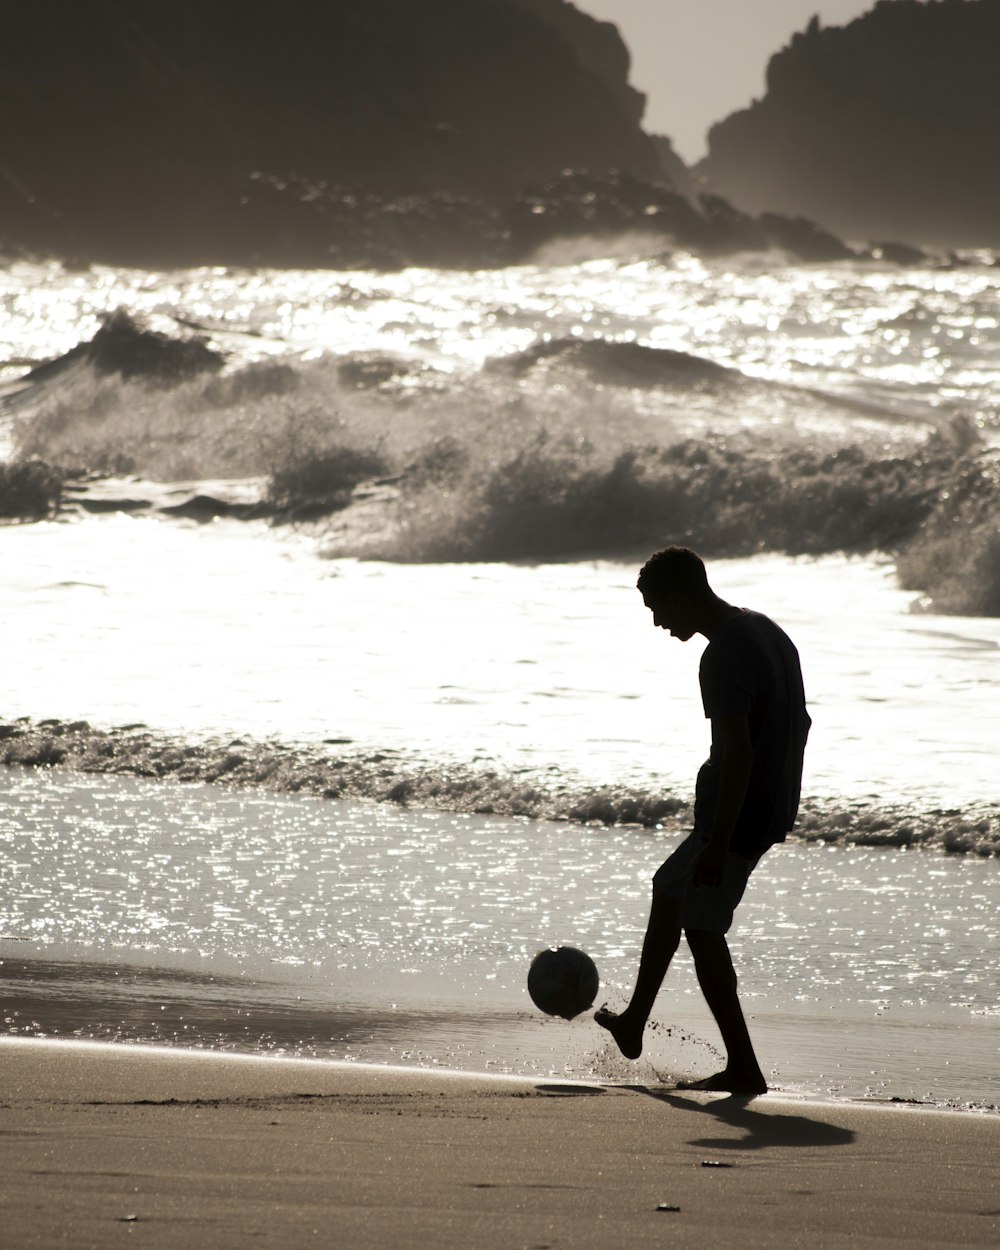 barefooted man playing with ball near seashore